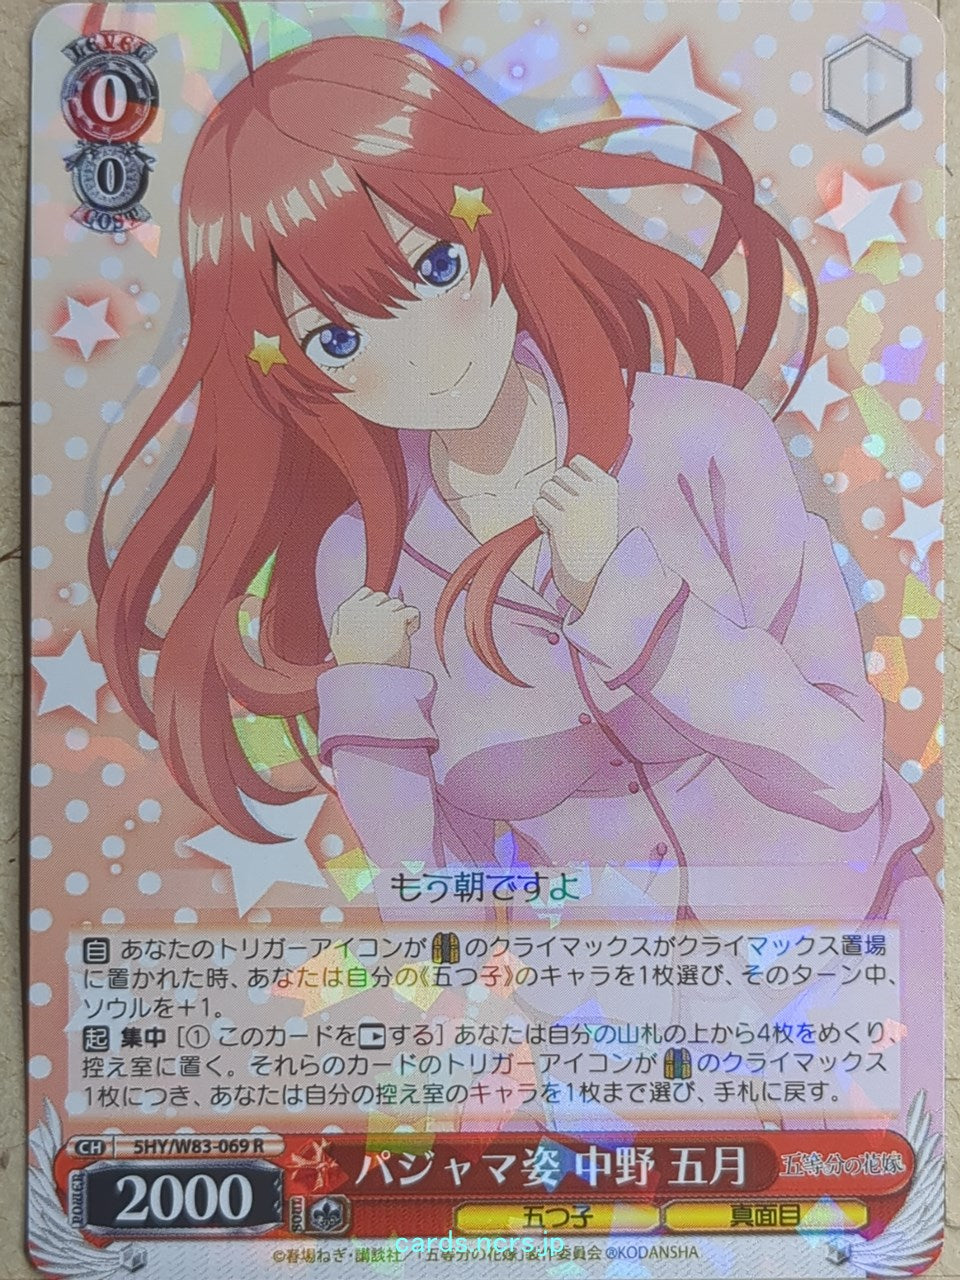 Weiss Schwarz The Quintessential Quintuplets -Itsuki Nakano-   Trading Card 5HY/W83-069R